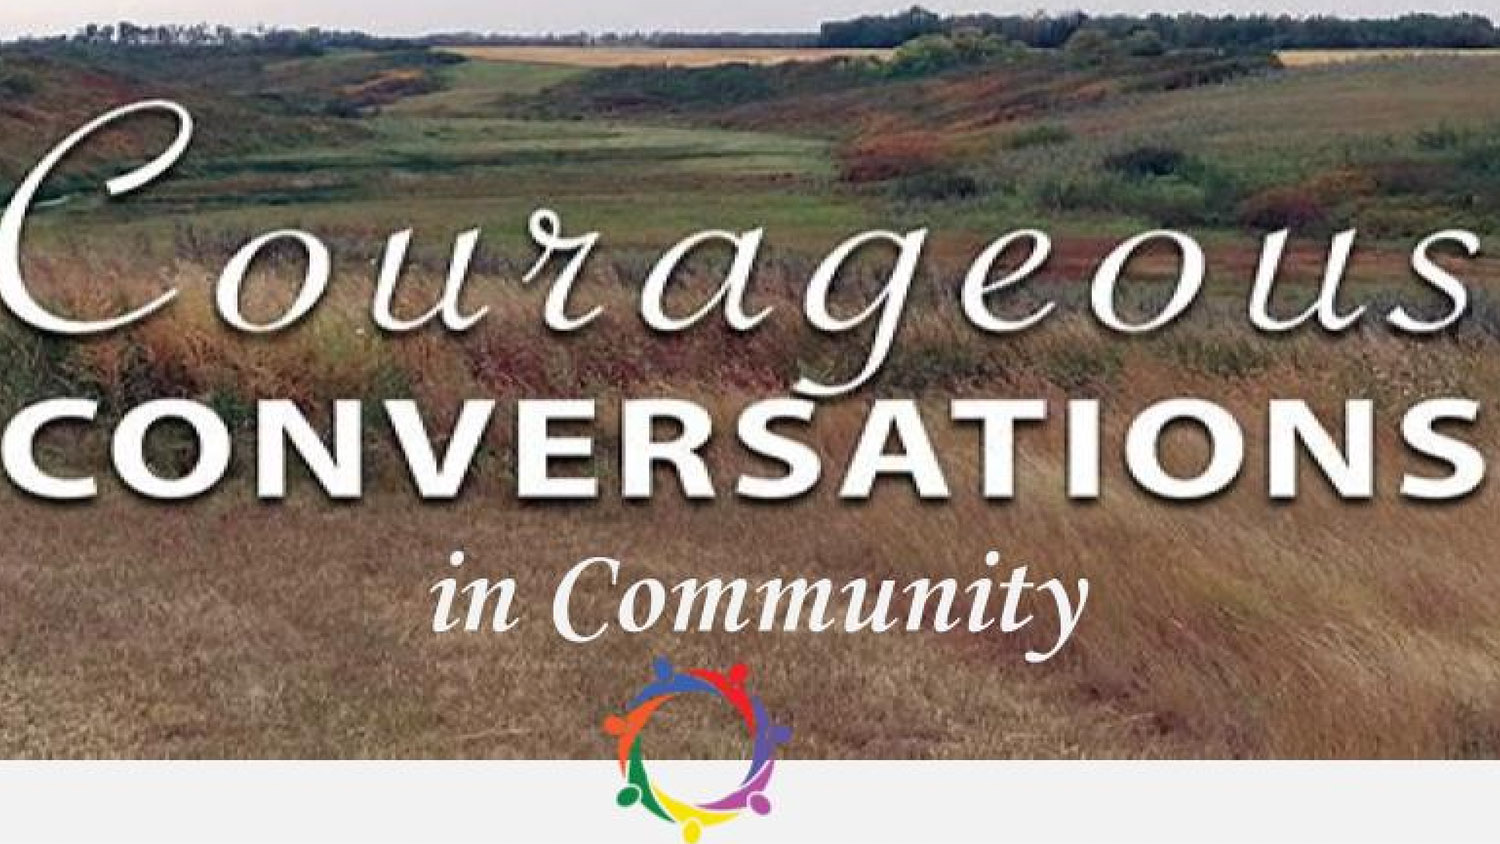 Courageous Conversations in Community